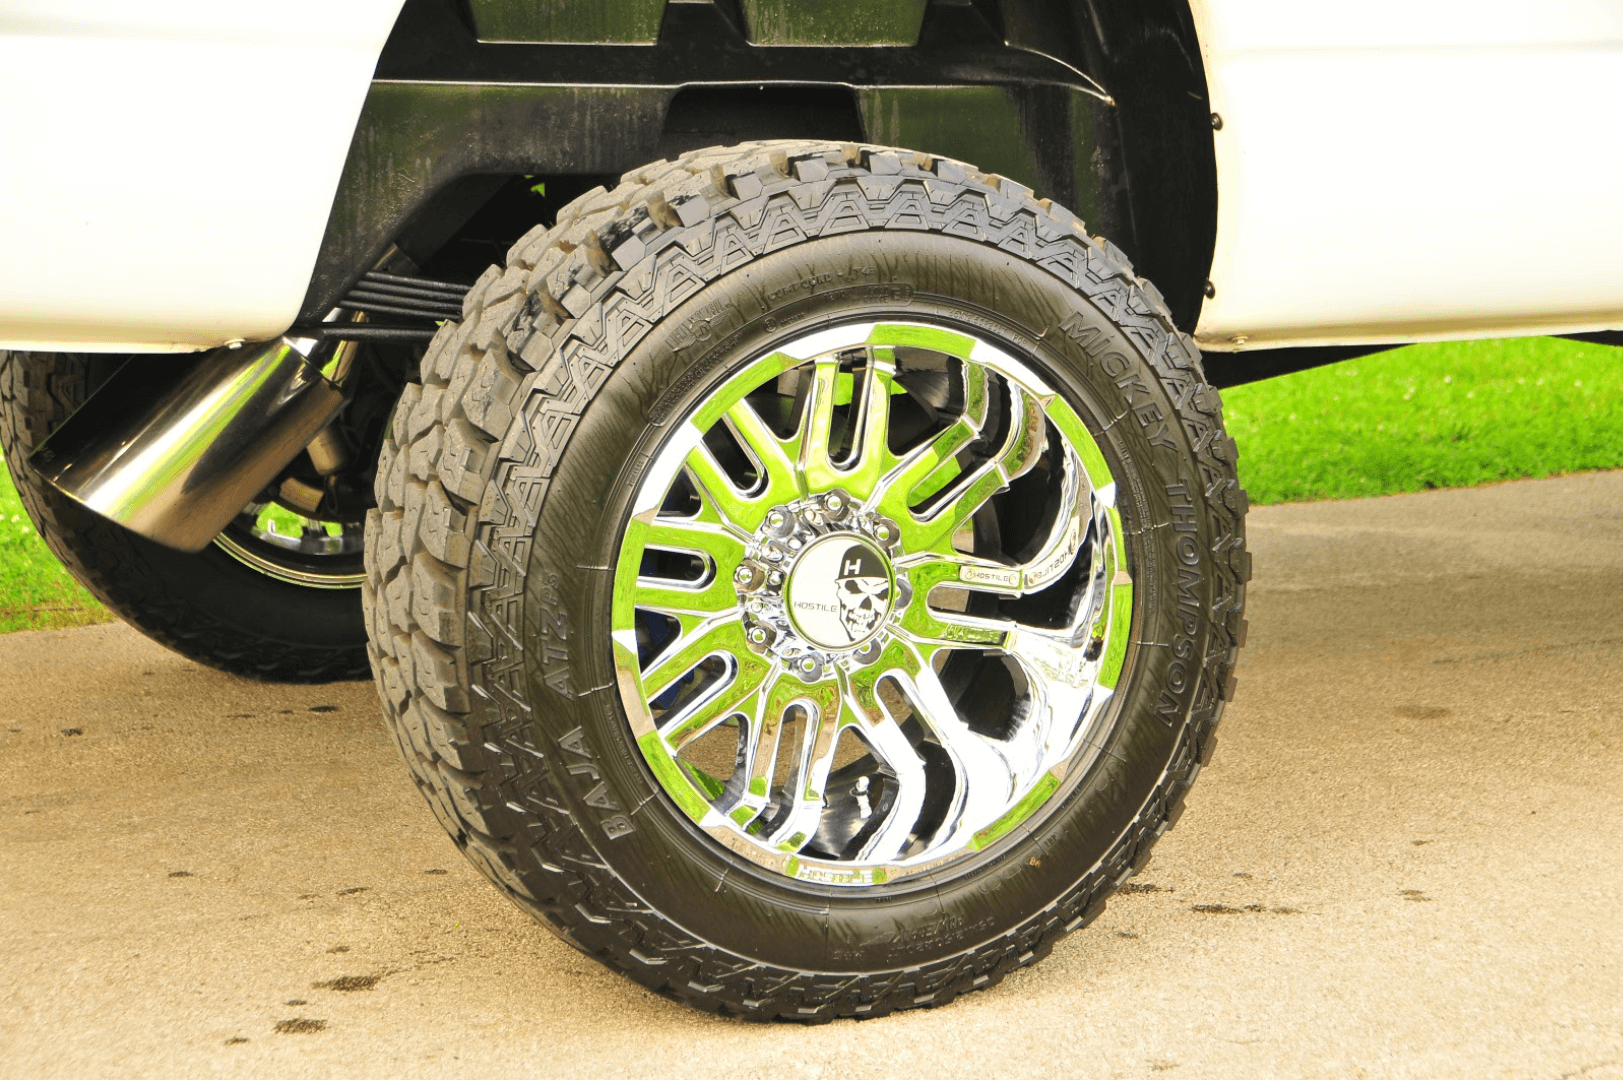 The 20-inch chrome Hostile Zombie wheels were sourced through XTown Performance. The wheels are wrapped with Mickey Thompson ATZP3 35-inch tires.